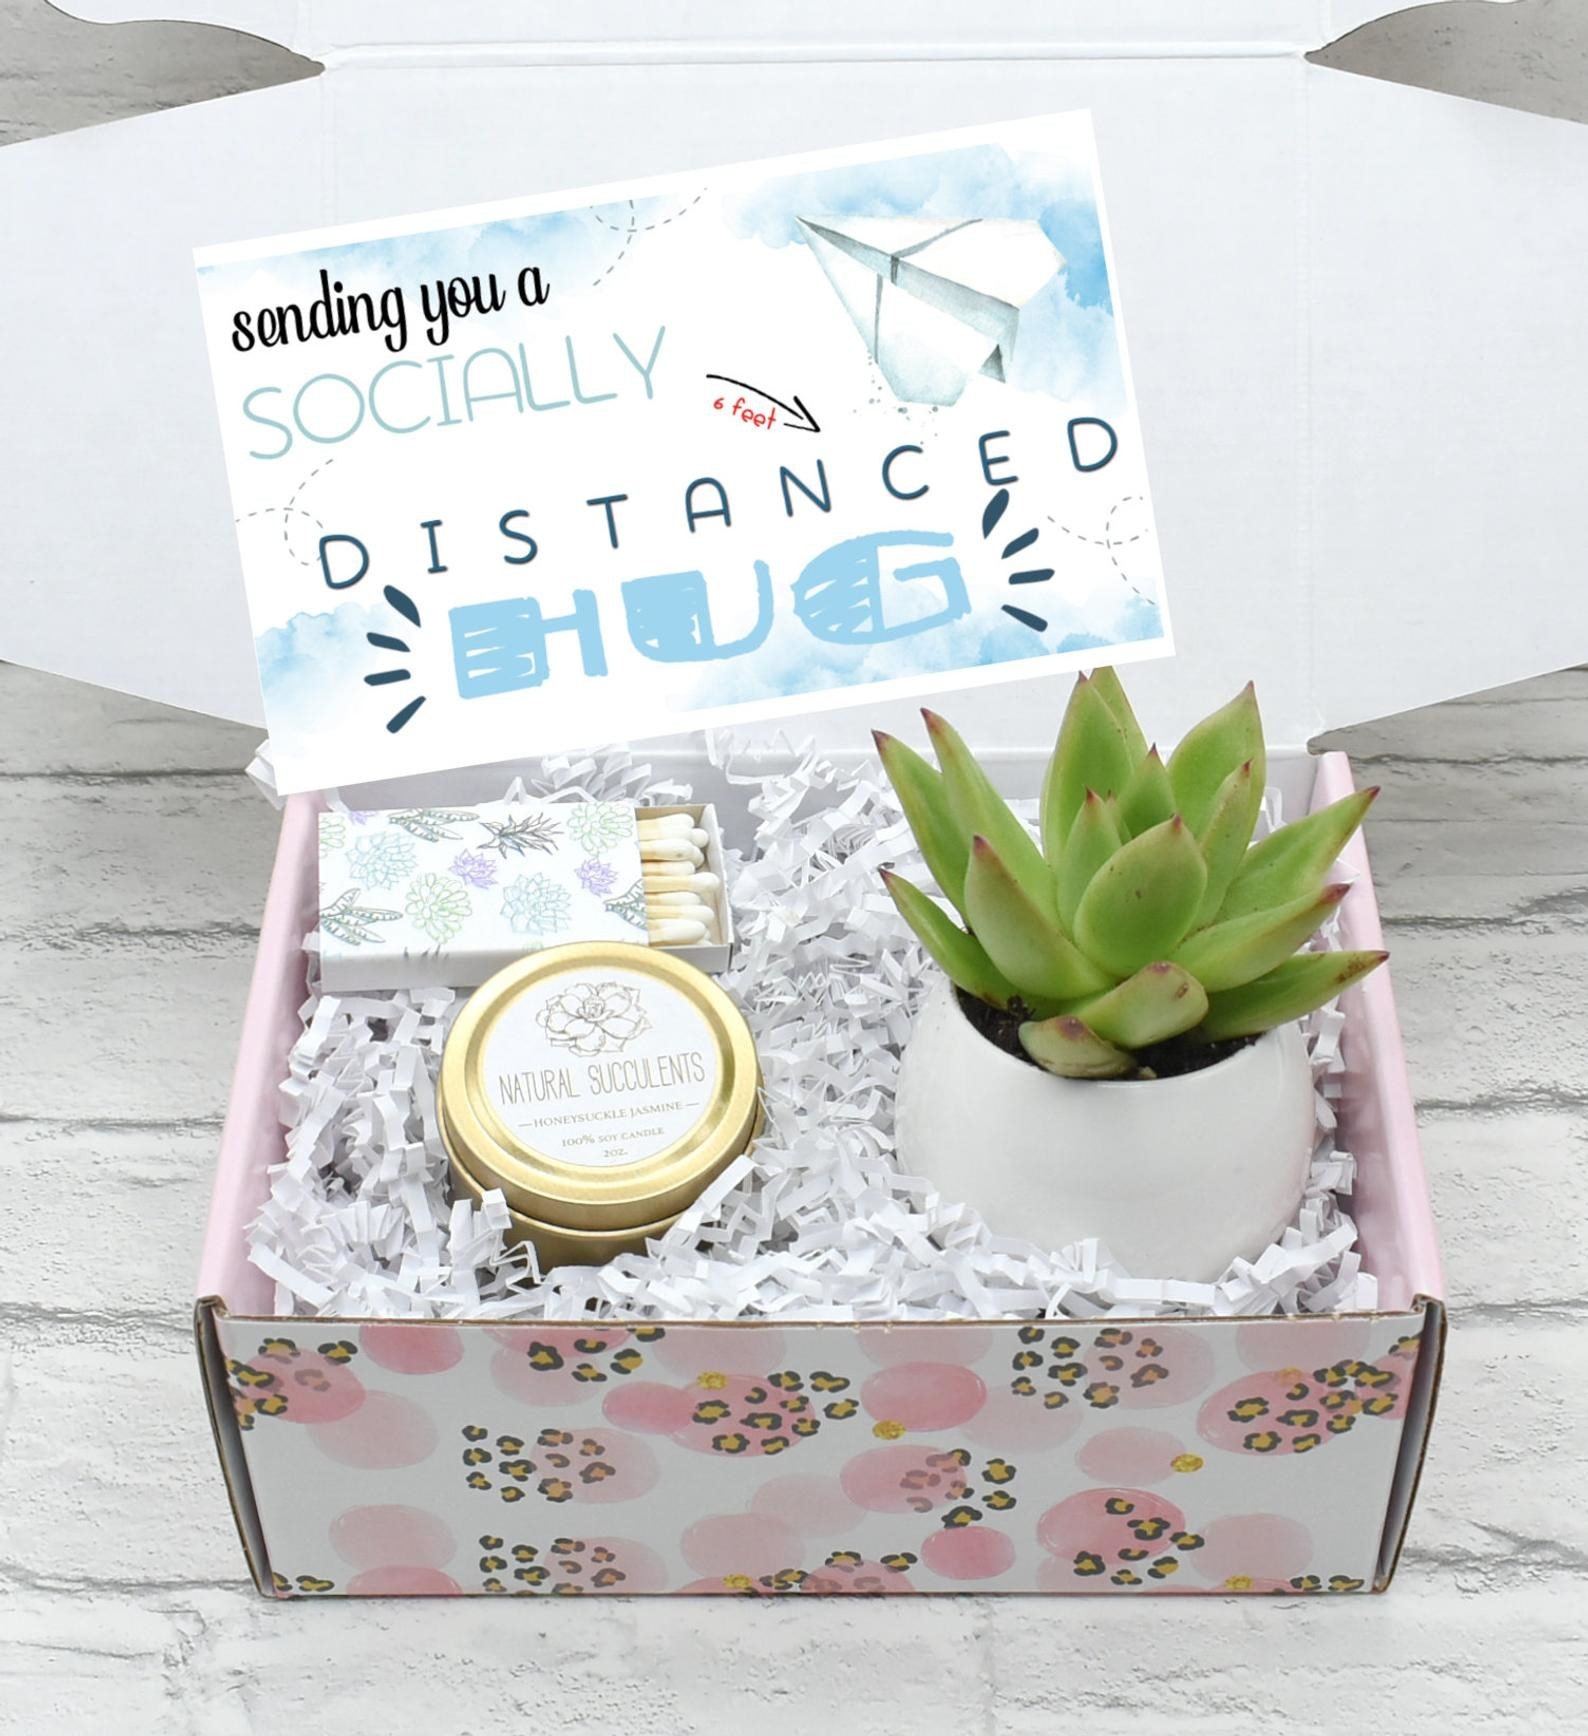 A care package filled with a planted succulent, candle, and matches with a note that reads &quot;sending you a socially distanced hug&quot;